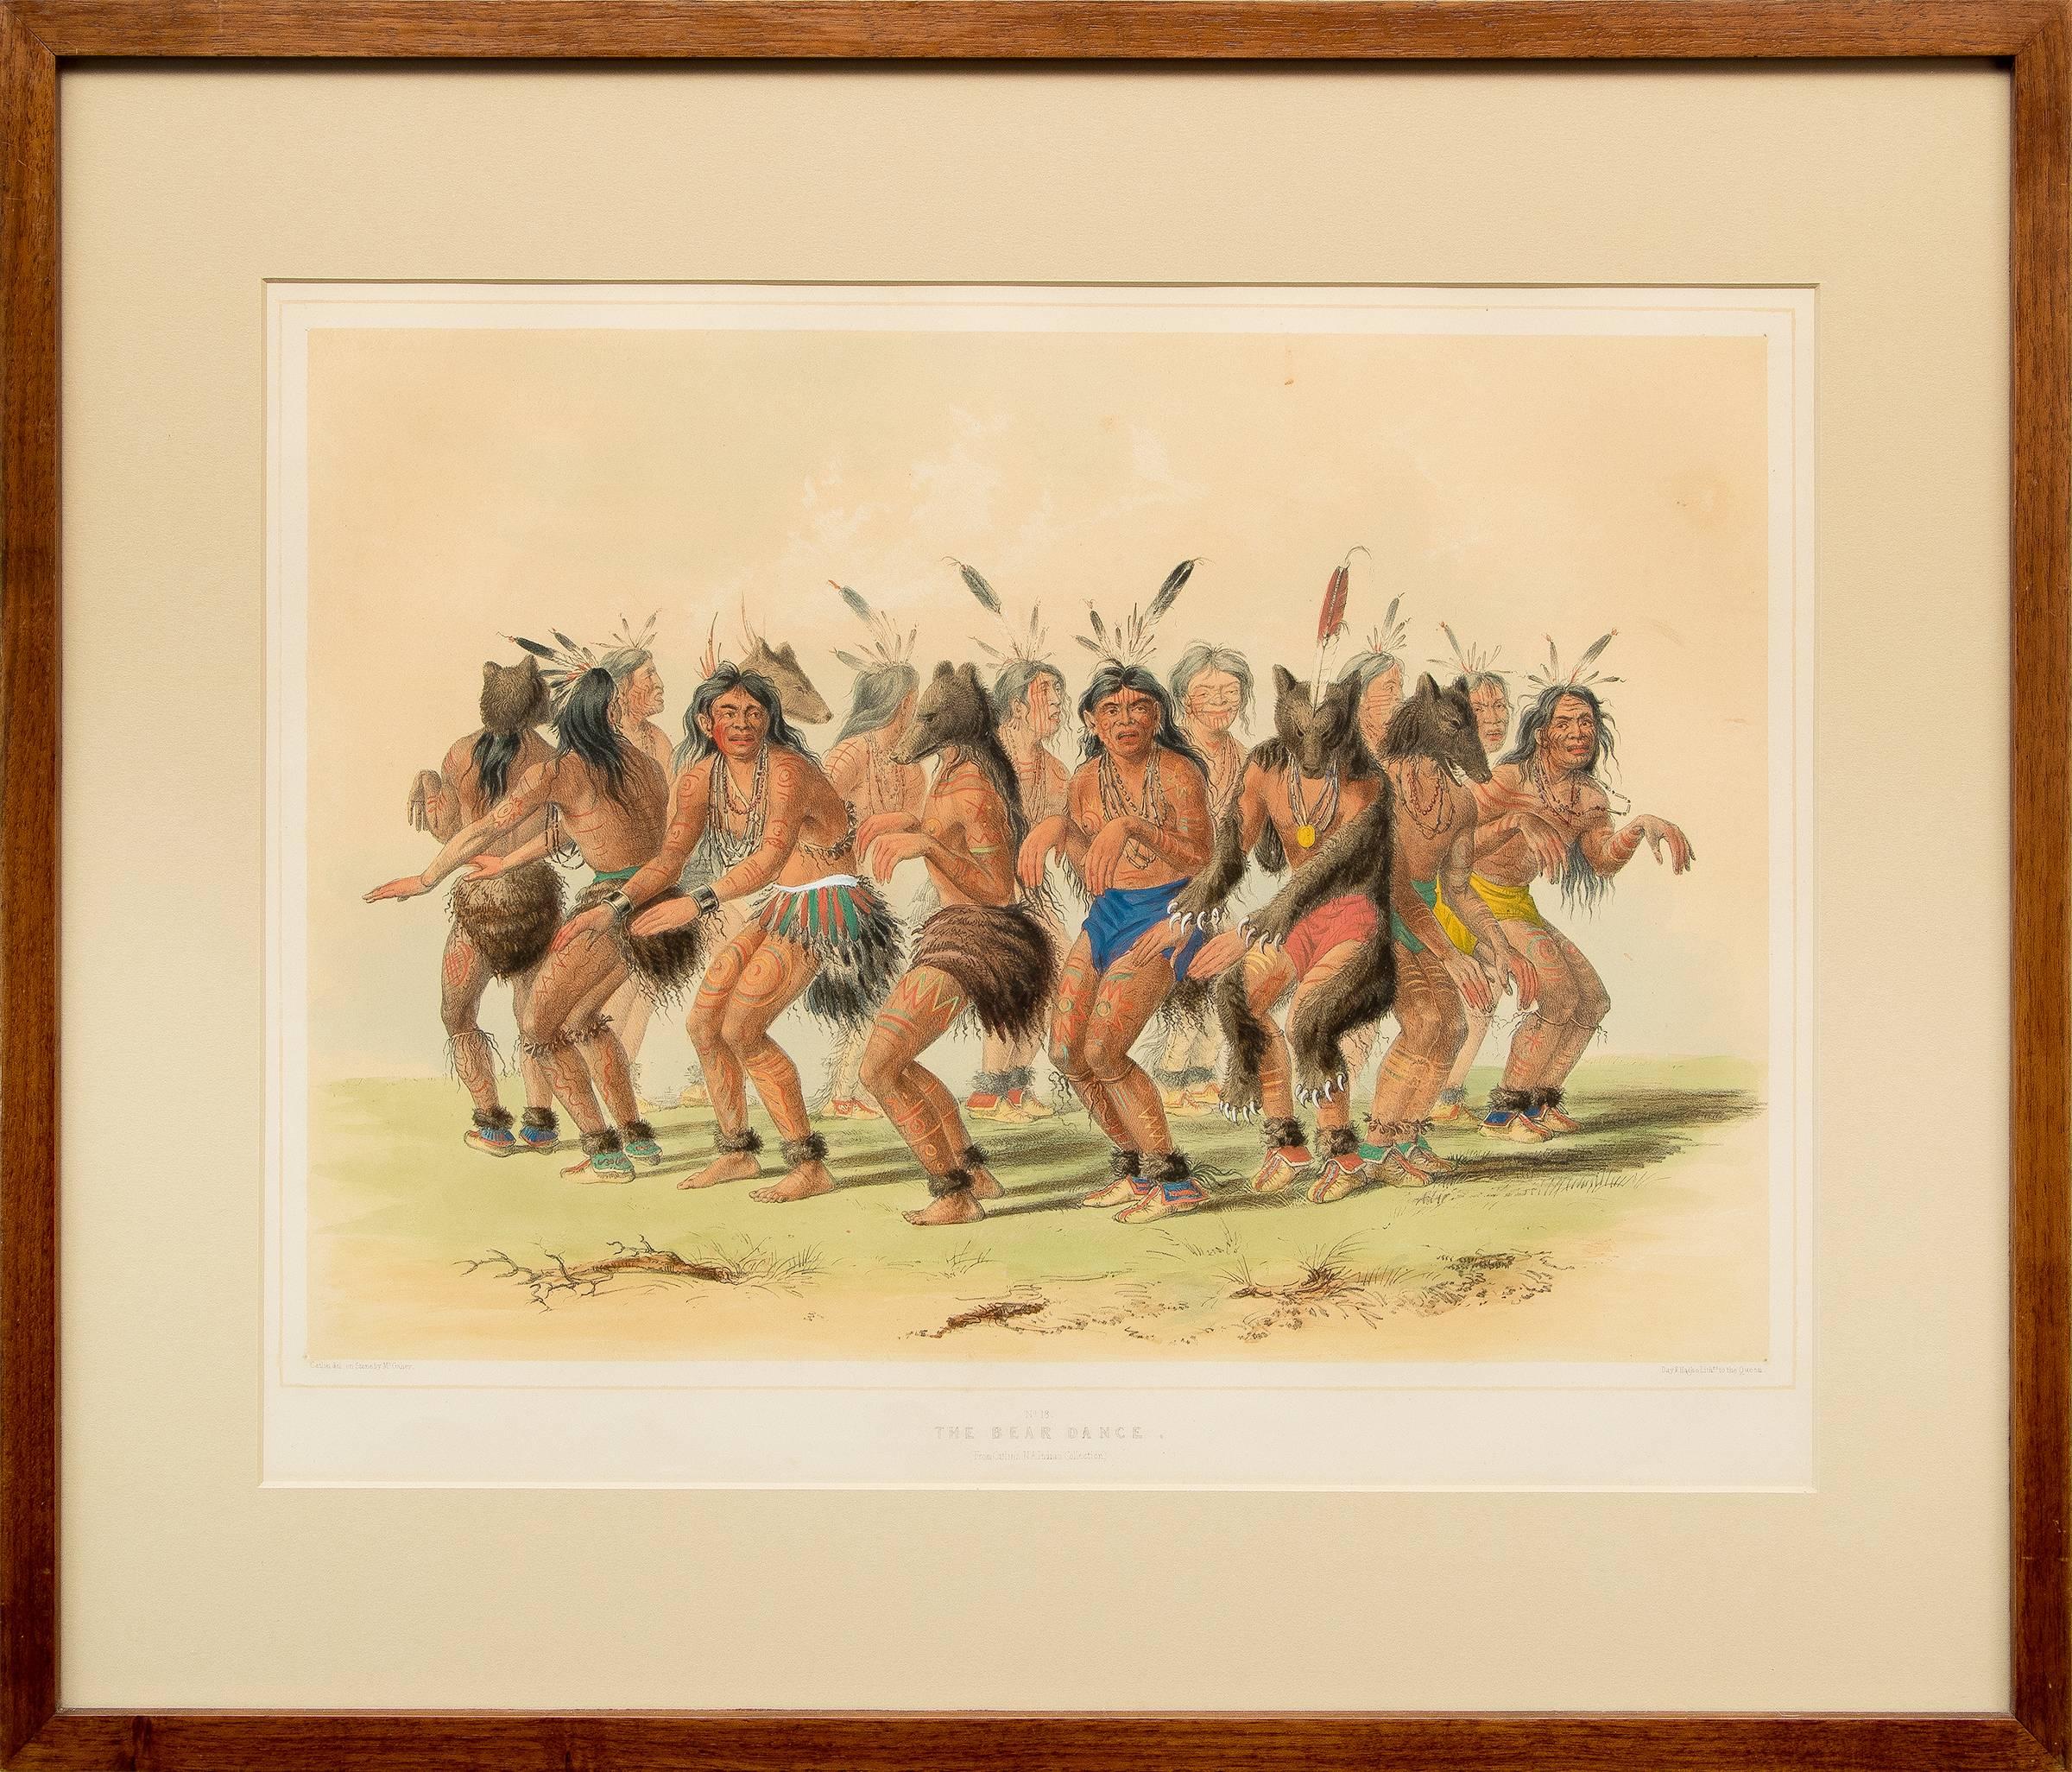 Two original hand-colored lithographs from Catlin's famed North American Indian portfolio. Each work is housed in a custom frame with archival materials. Each print as shown within the mat measure 15 x 19 inches; outer dimensions of each frame